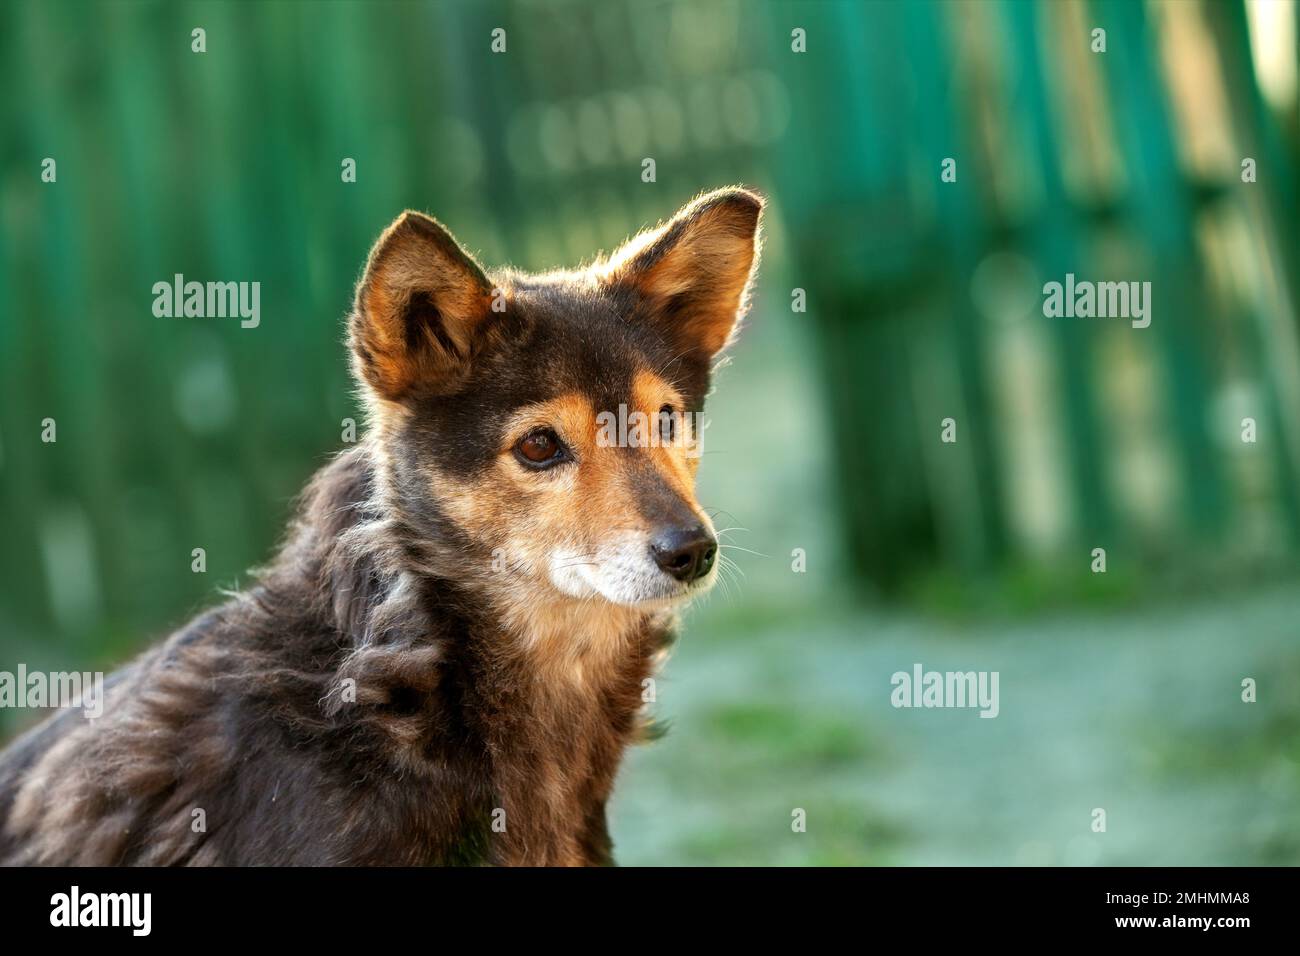 Portrait of a dog outdoors near a green wooden fence Stock Photo